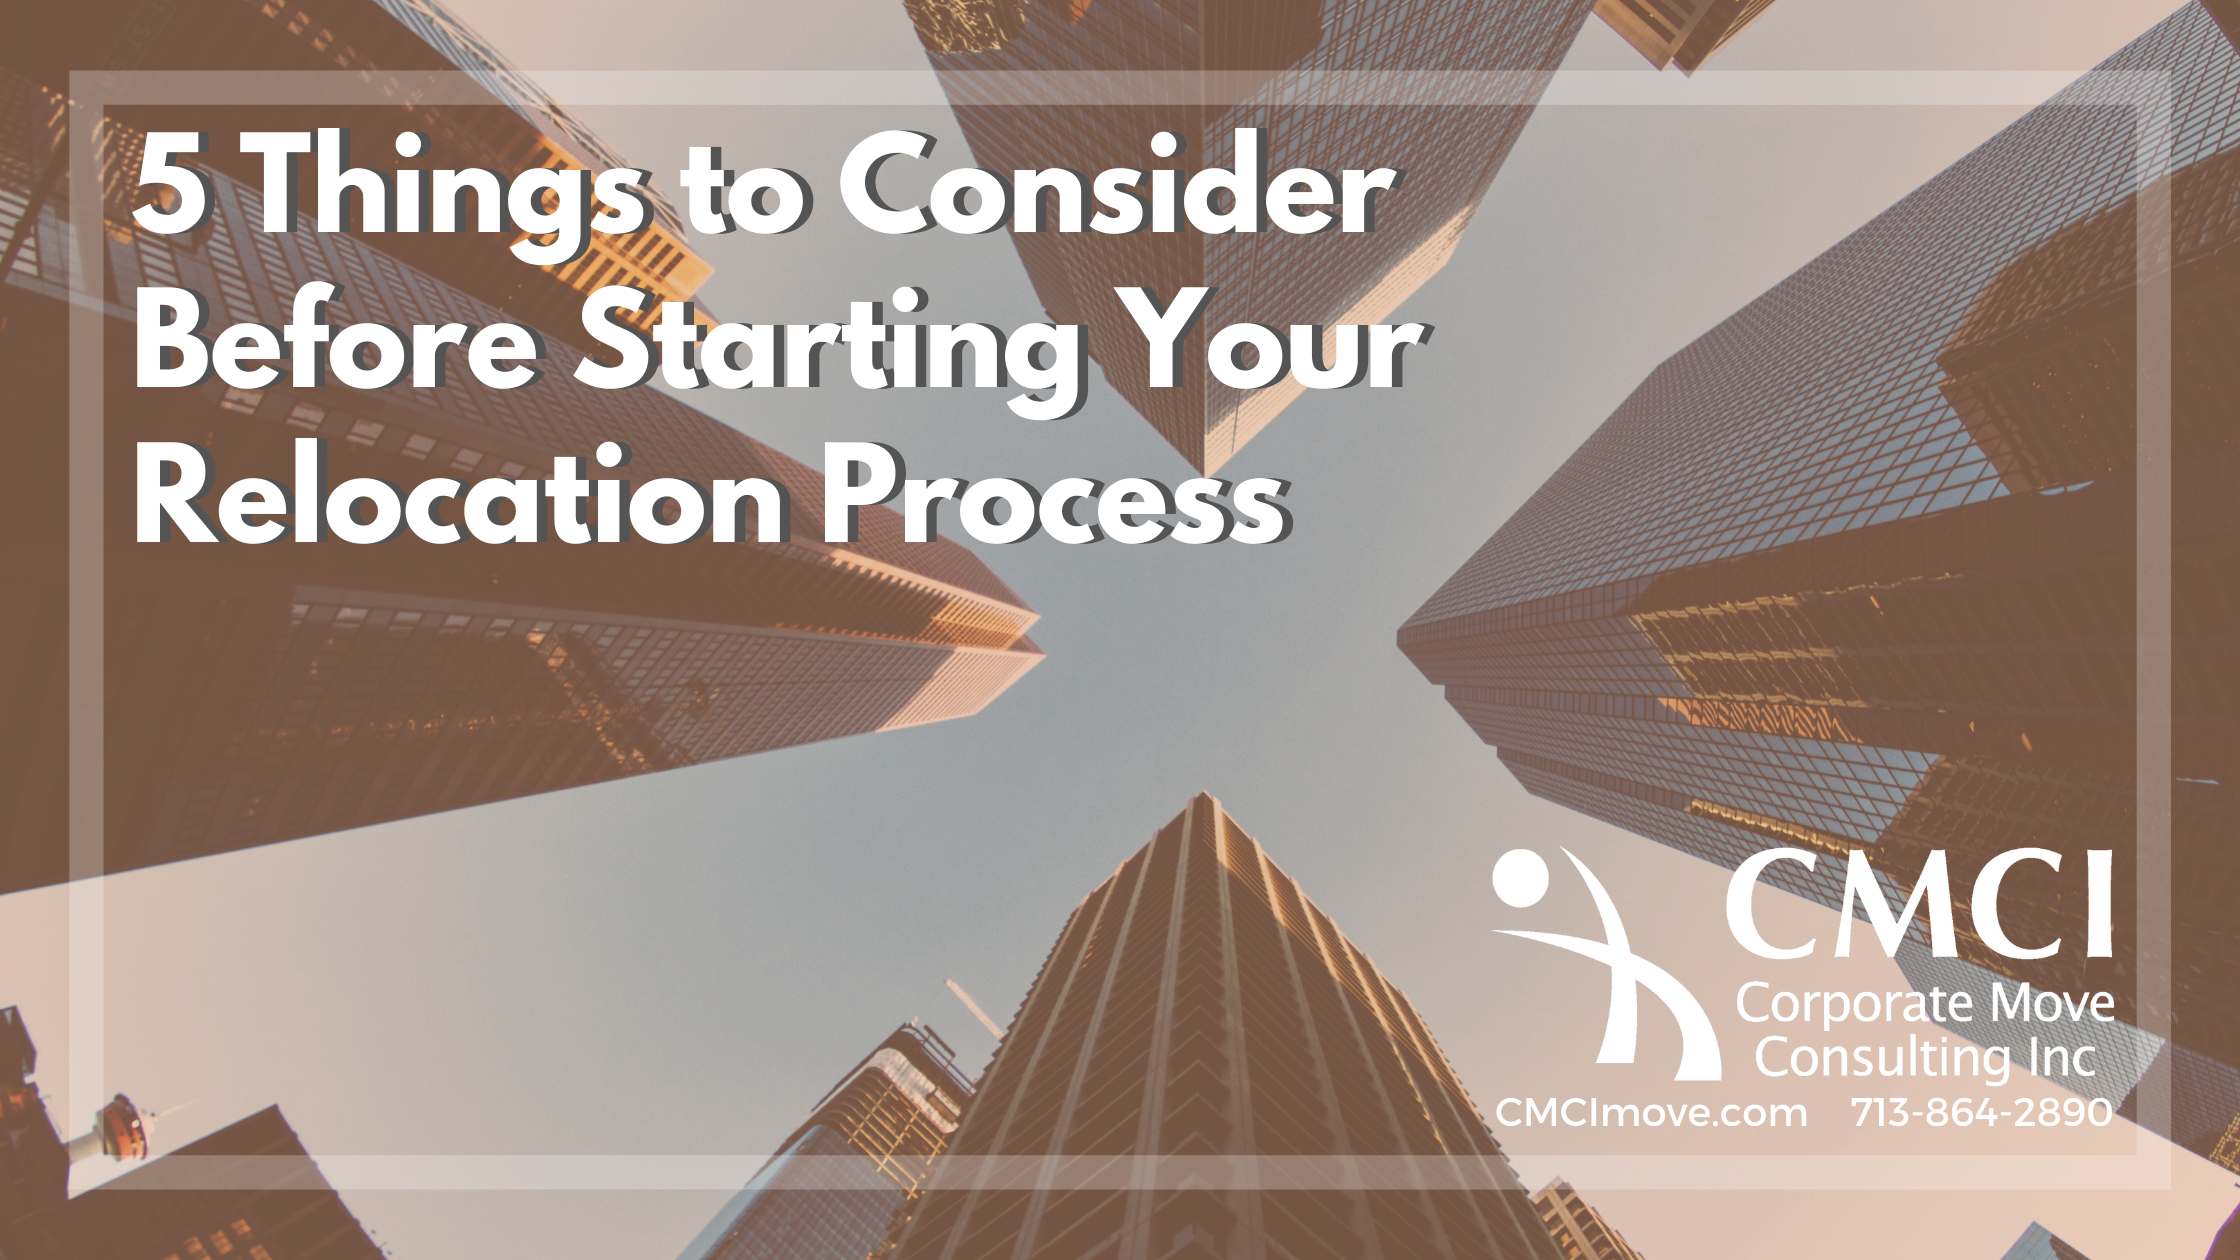 5 Things to Consider Before Starting Your Relocation Process